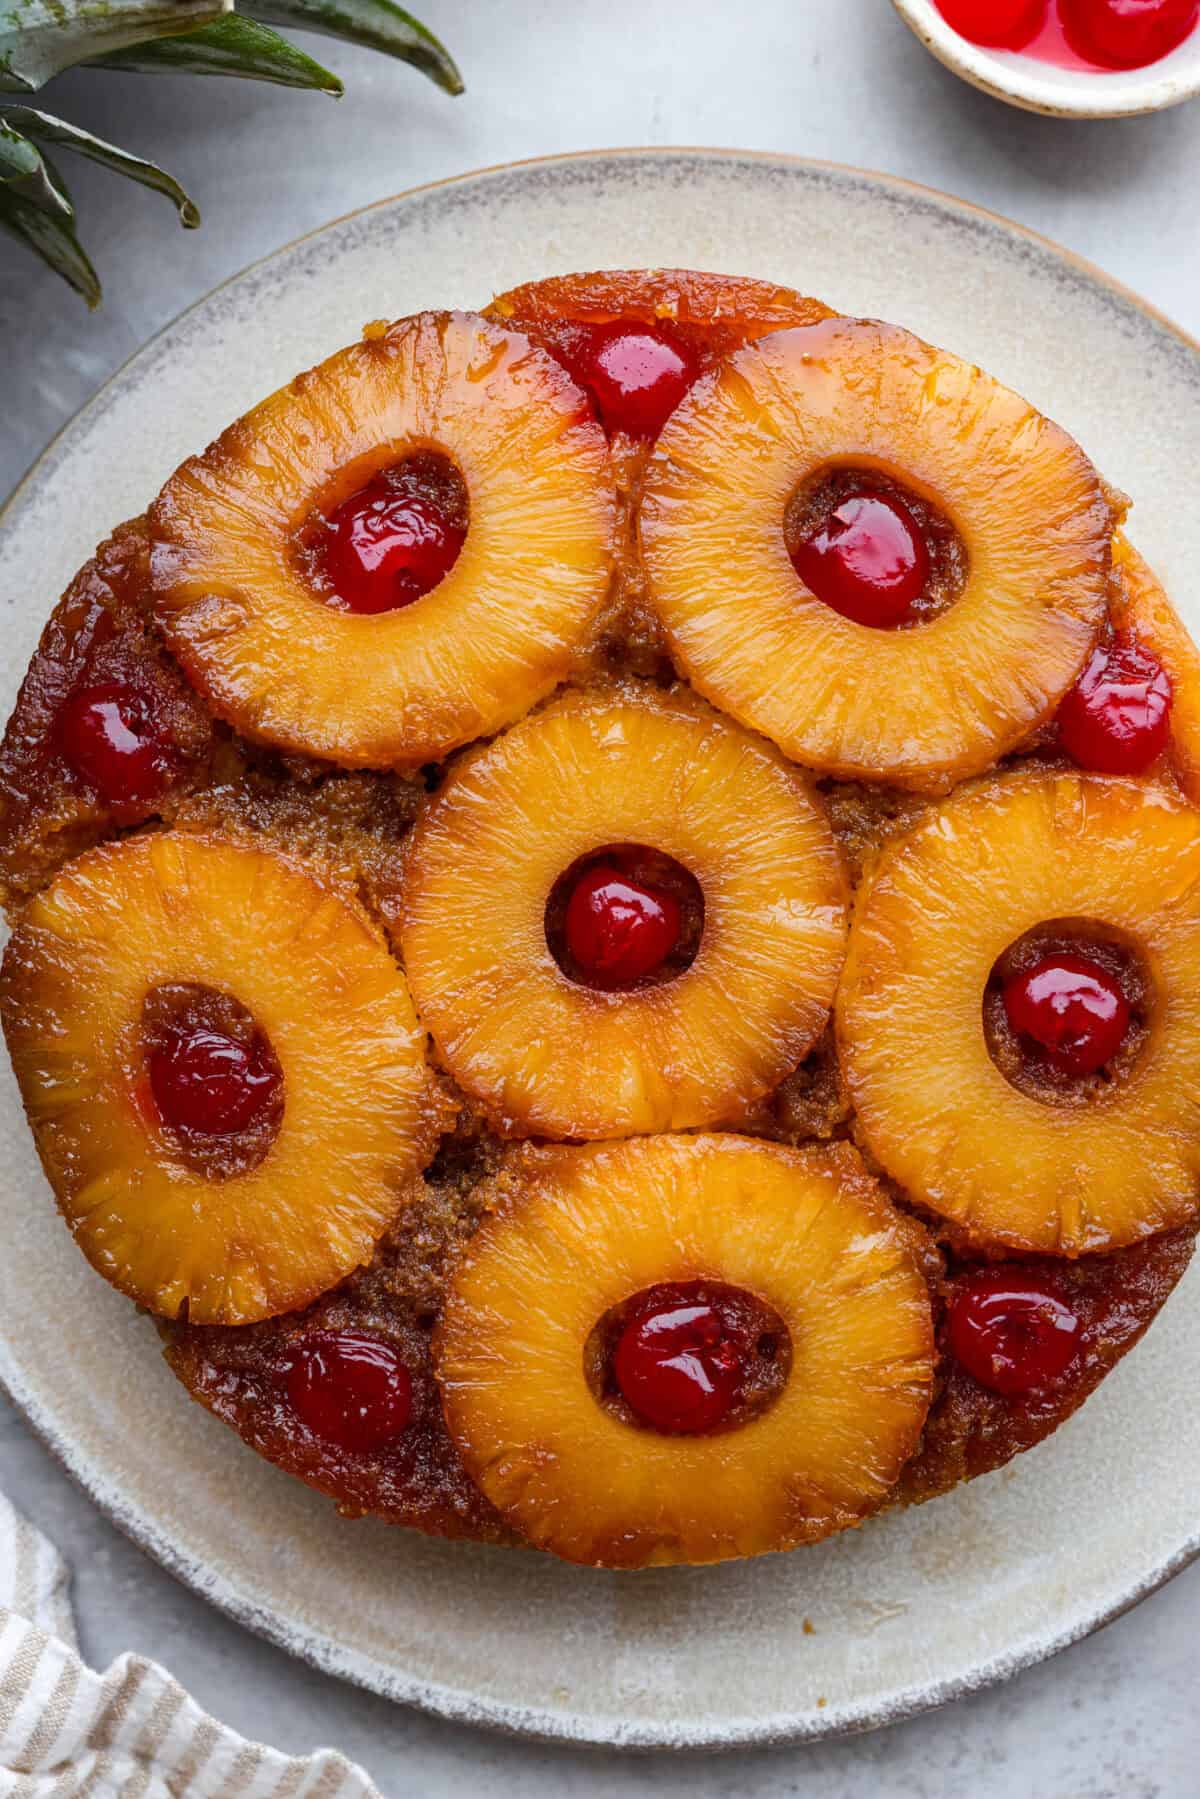 Top view of pineapple upside down cake on a plate.